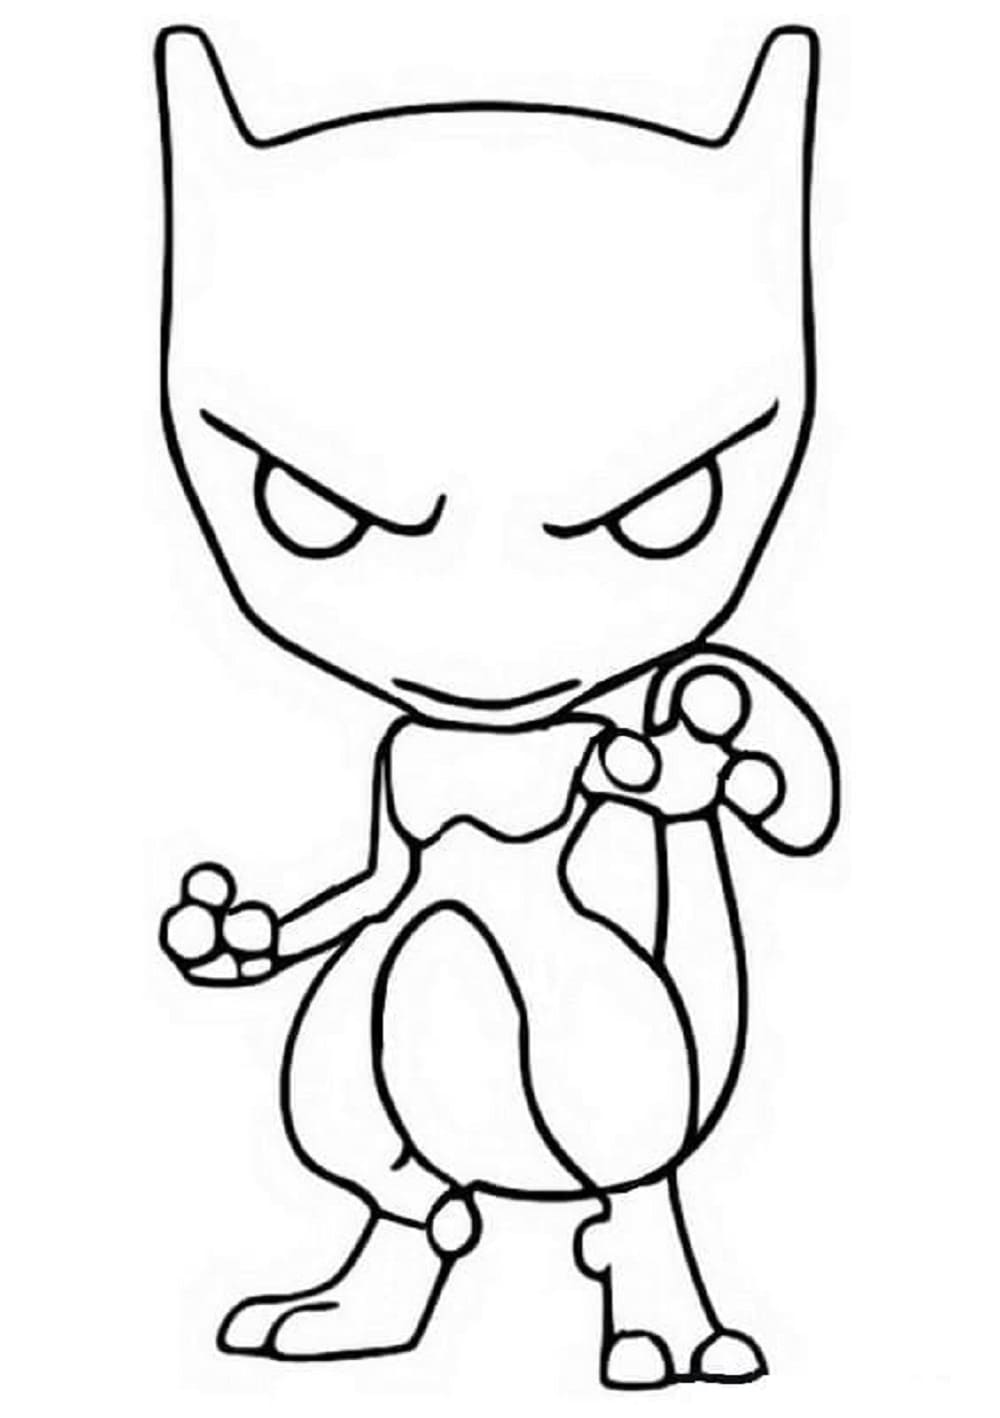 Printable Funko Pop Mewtwo Coloring Page